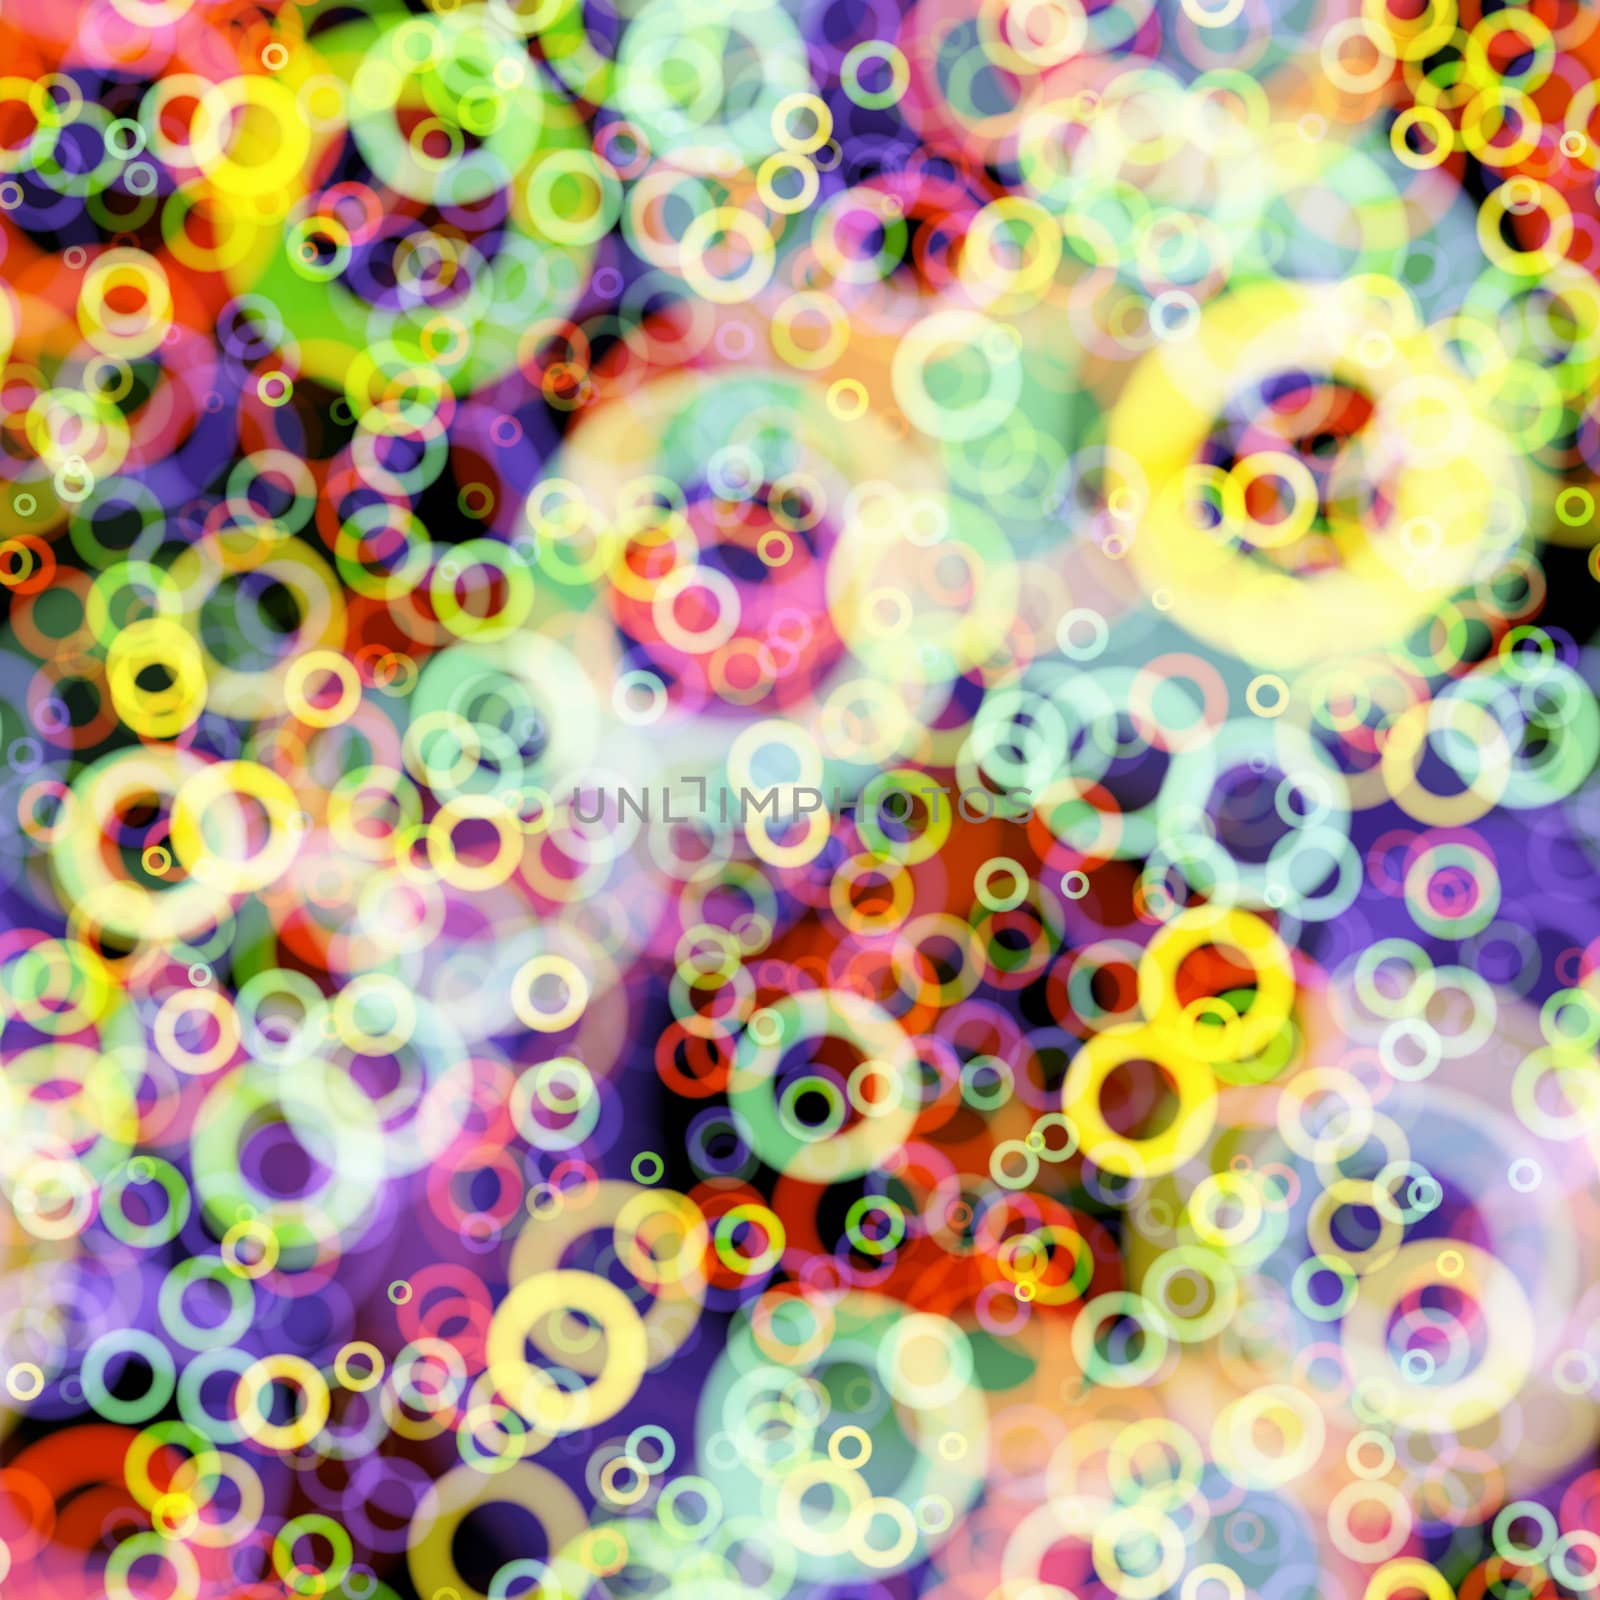 Colorful Seamless Pattern with Mini Retro Circles